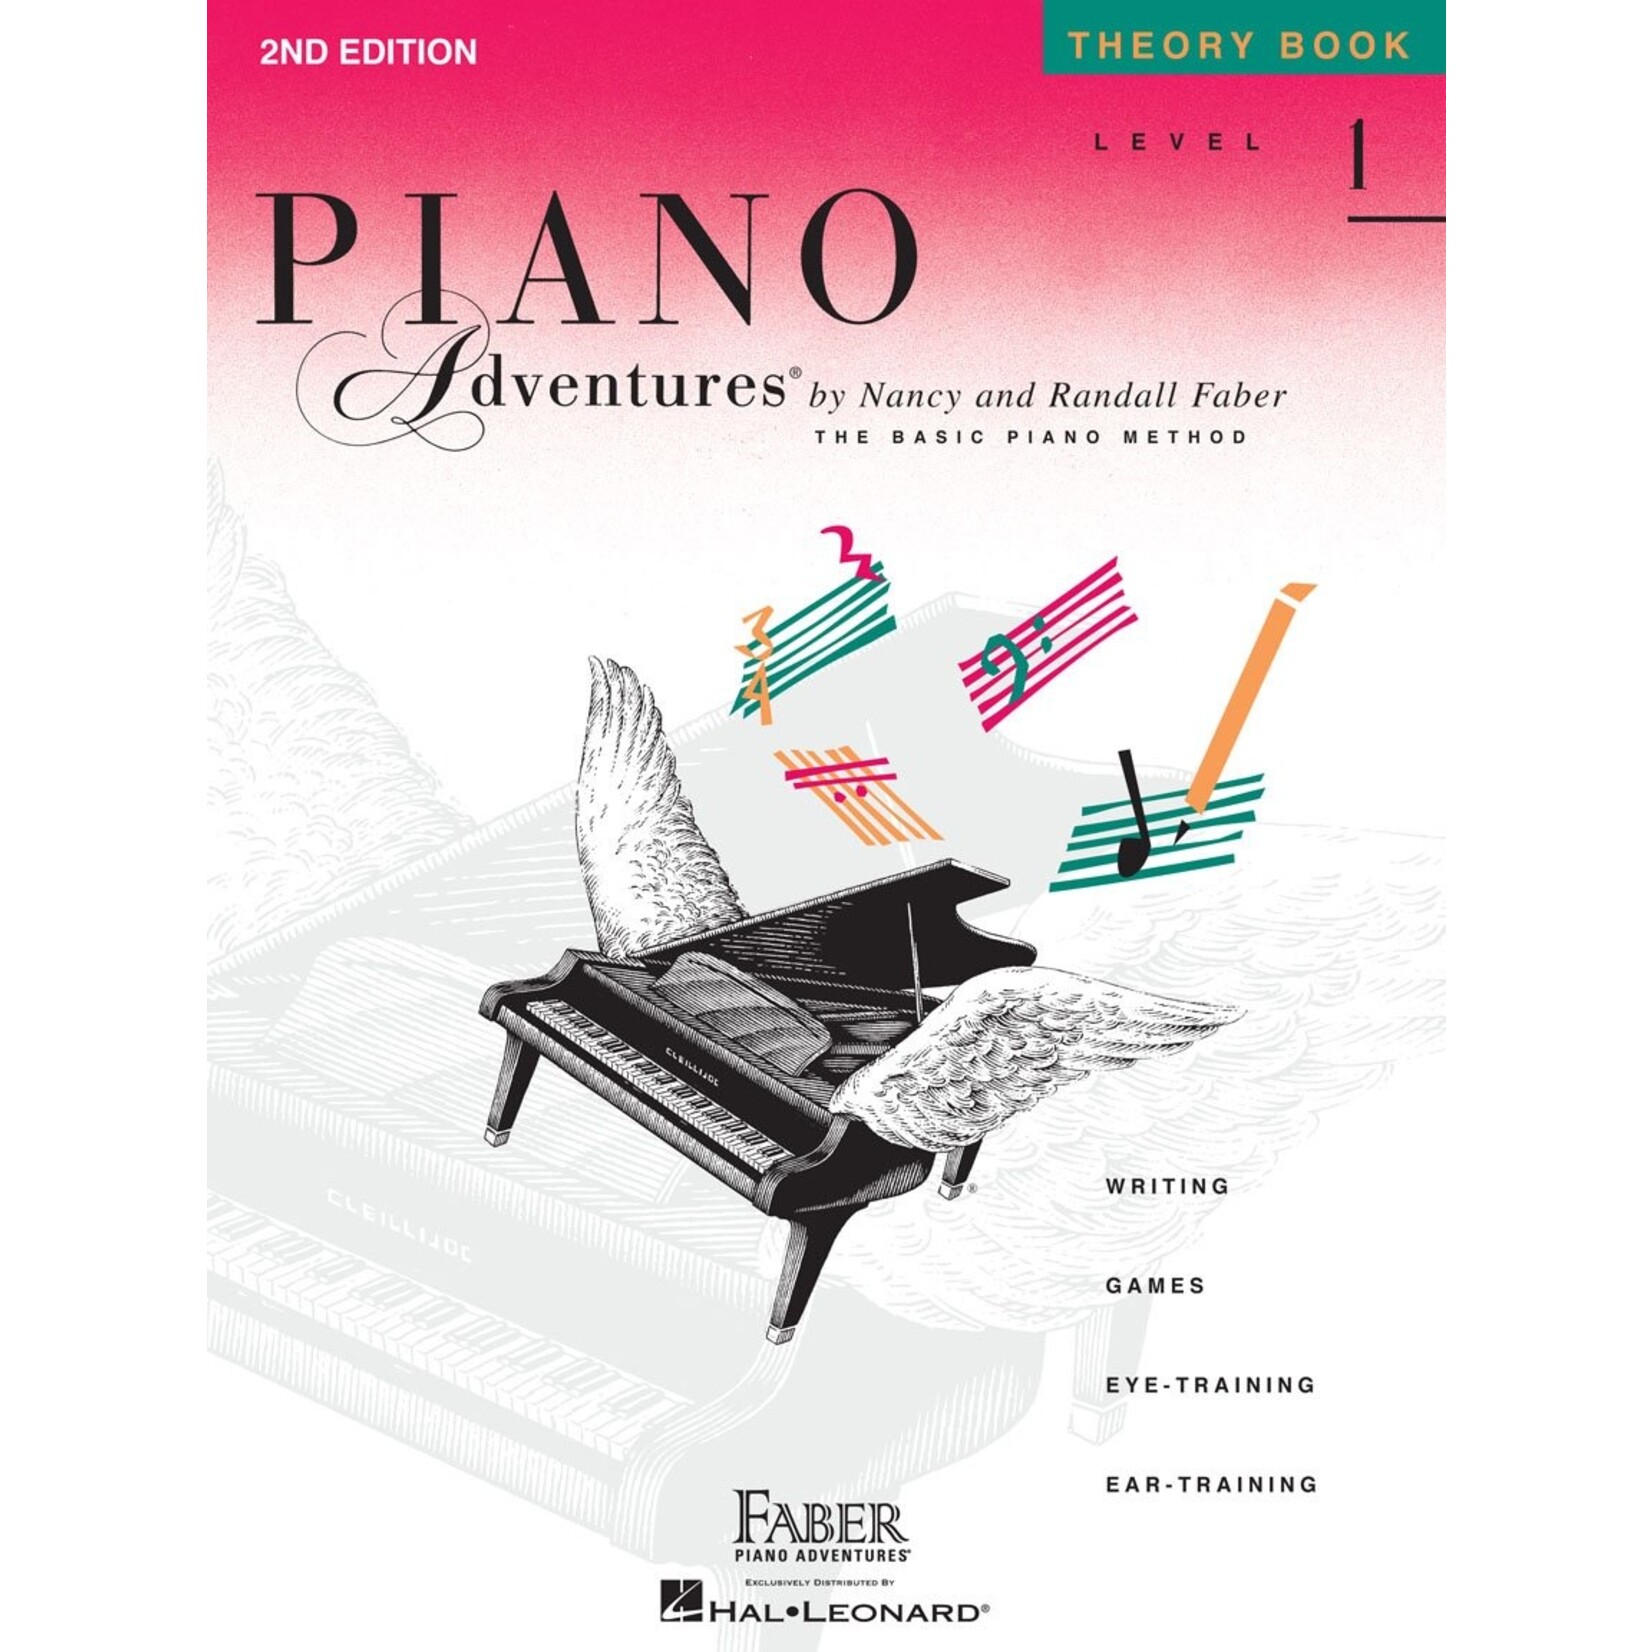 Faber Piano Adventures Level 1 - Lesson Book - 2nd Edition